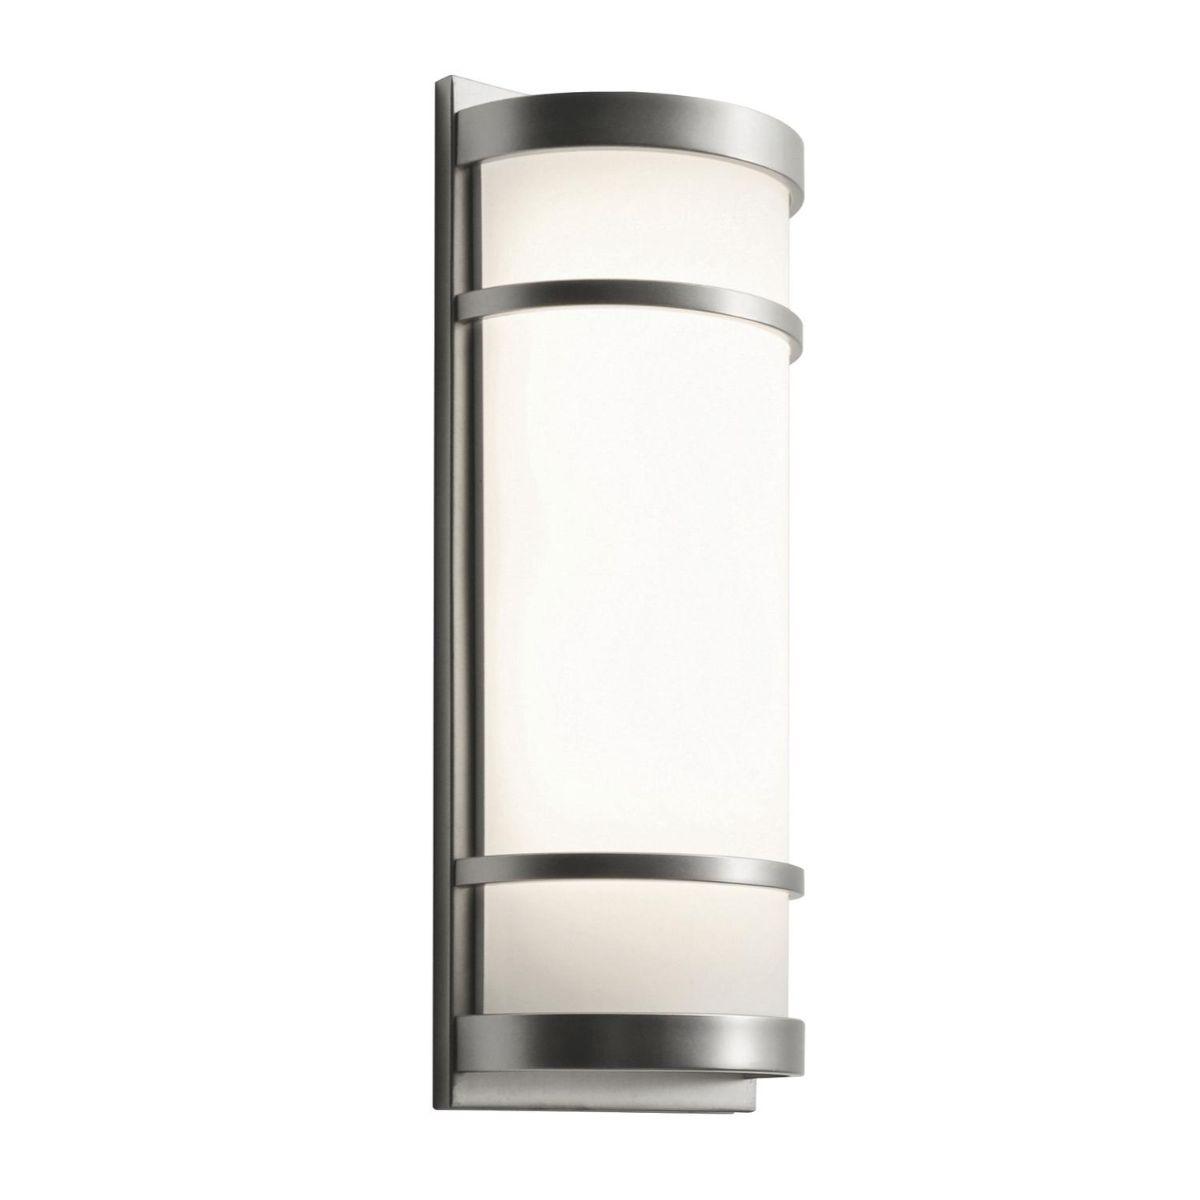 Brio 18 in. LED Wall Light